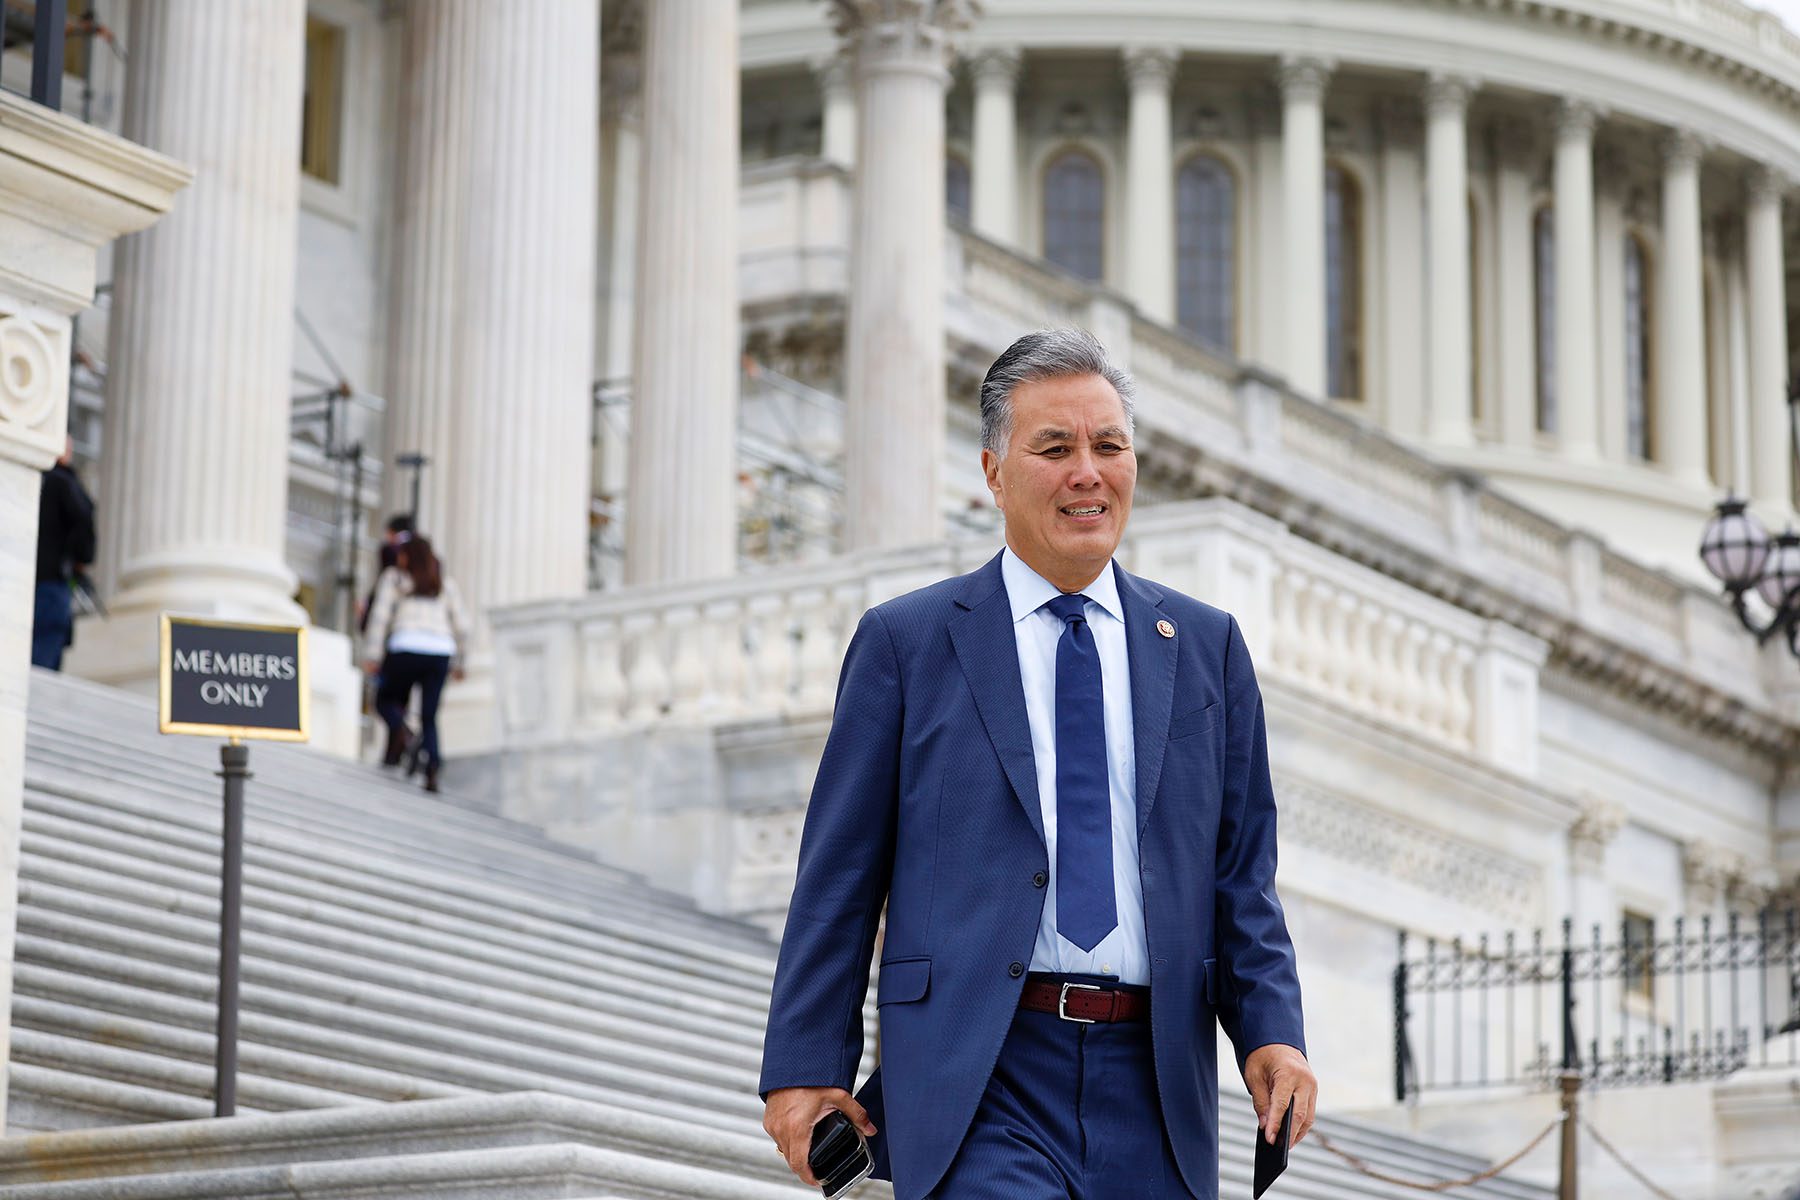 Rep. Mark Takano leaves the Capitol Building.